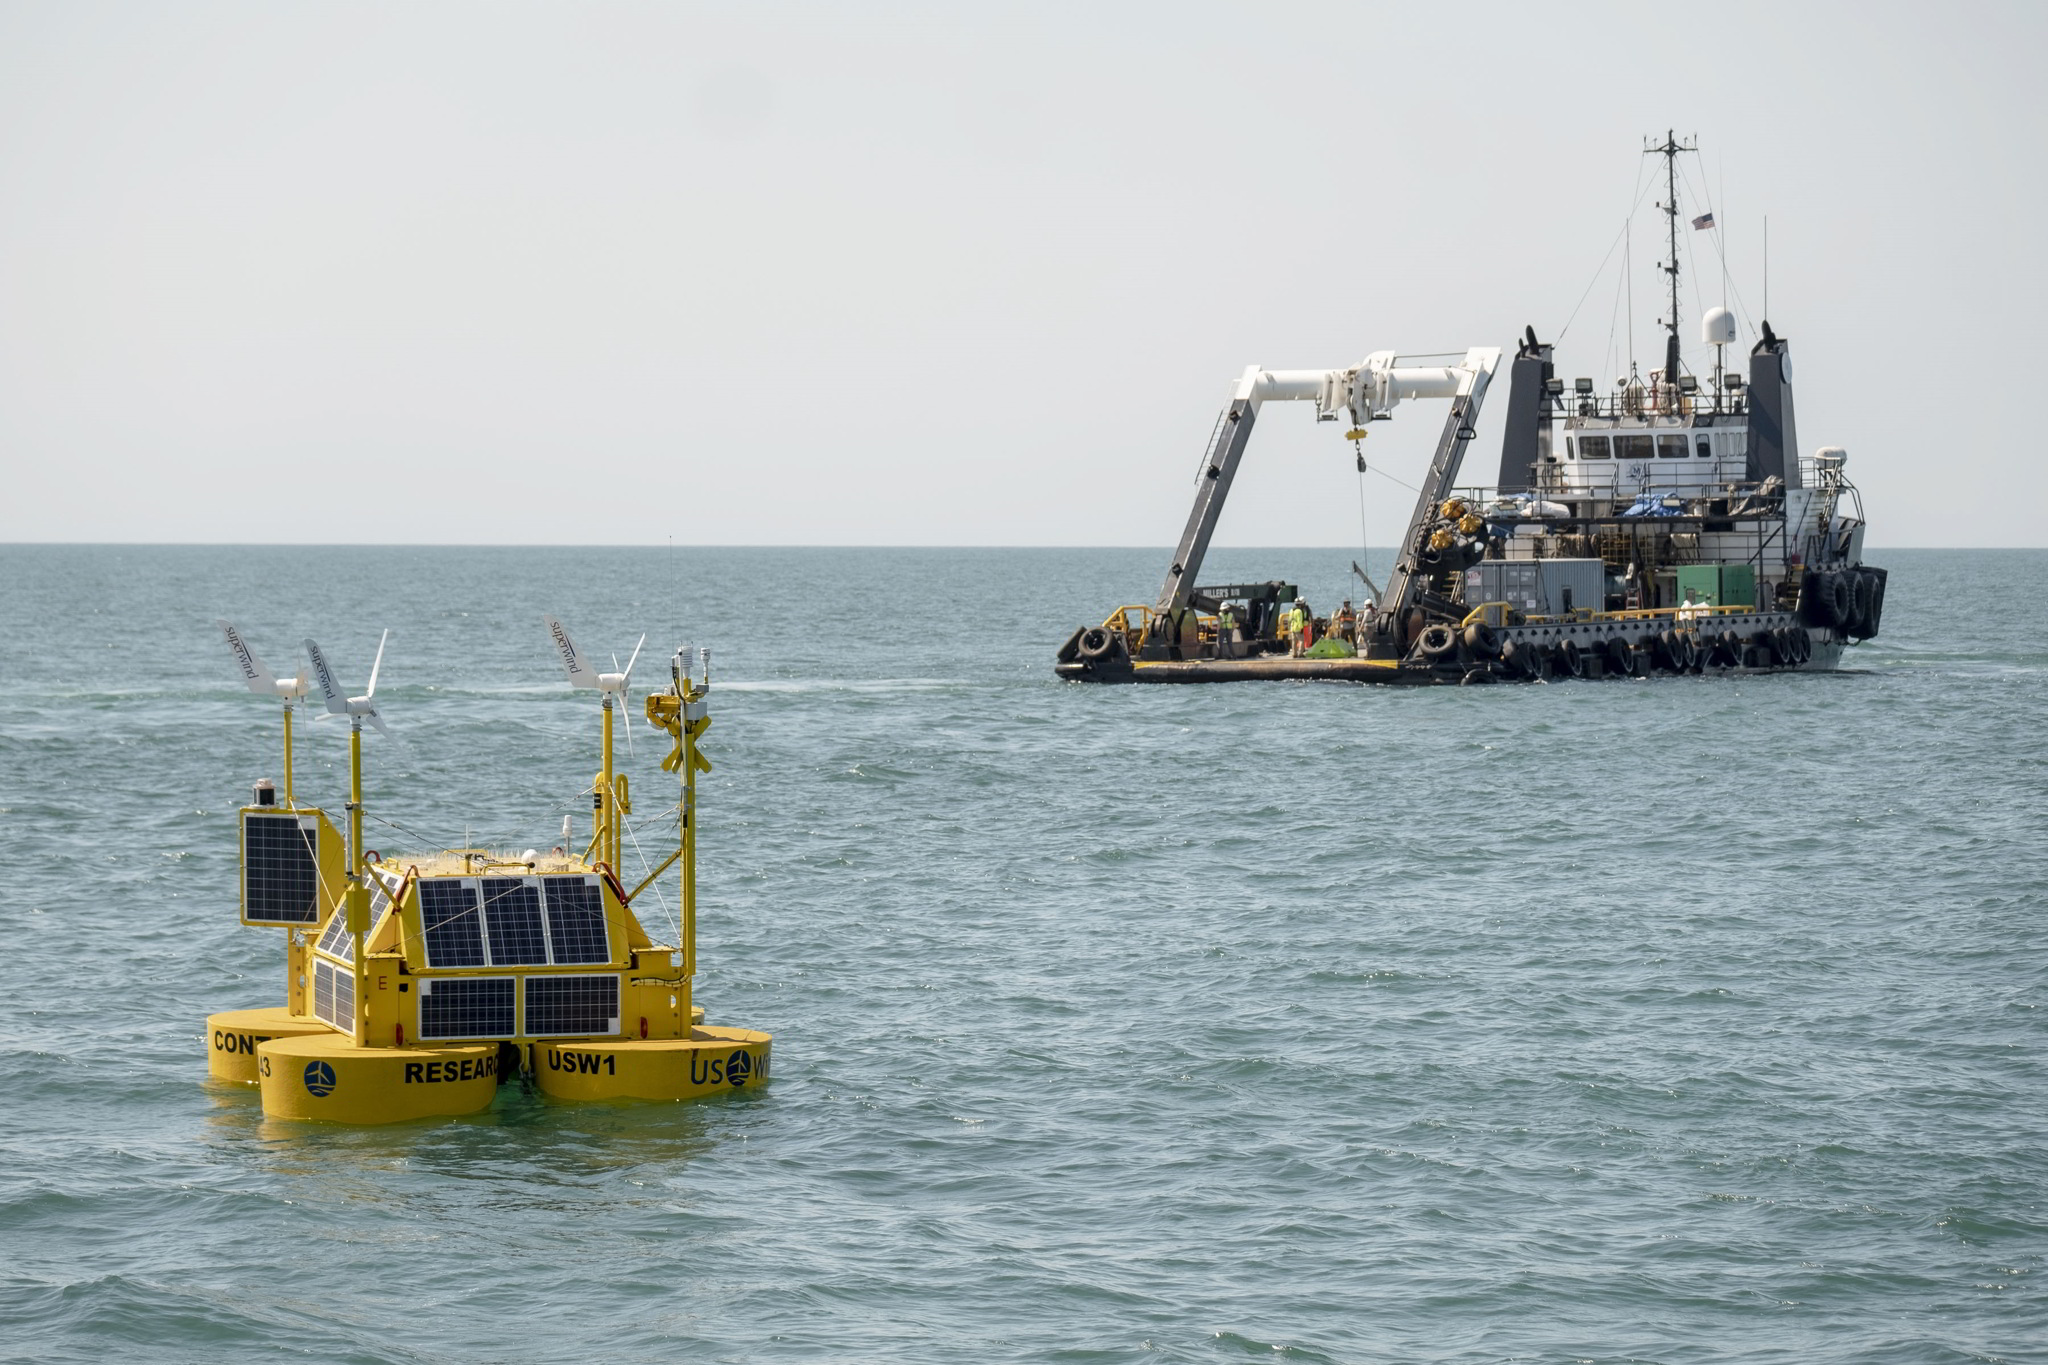 A photo of the LiDAR buoy deployed in waters off Ocean City